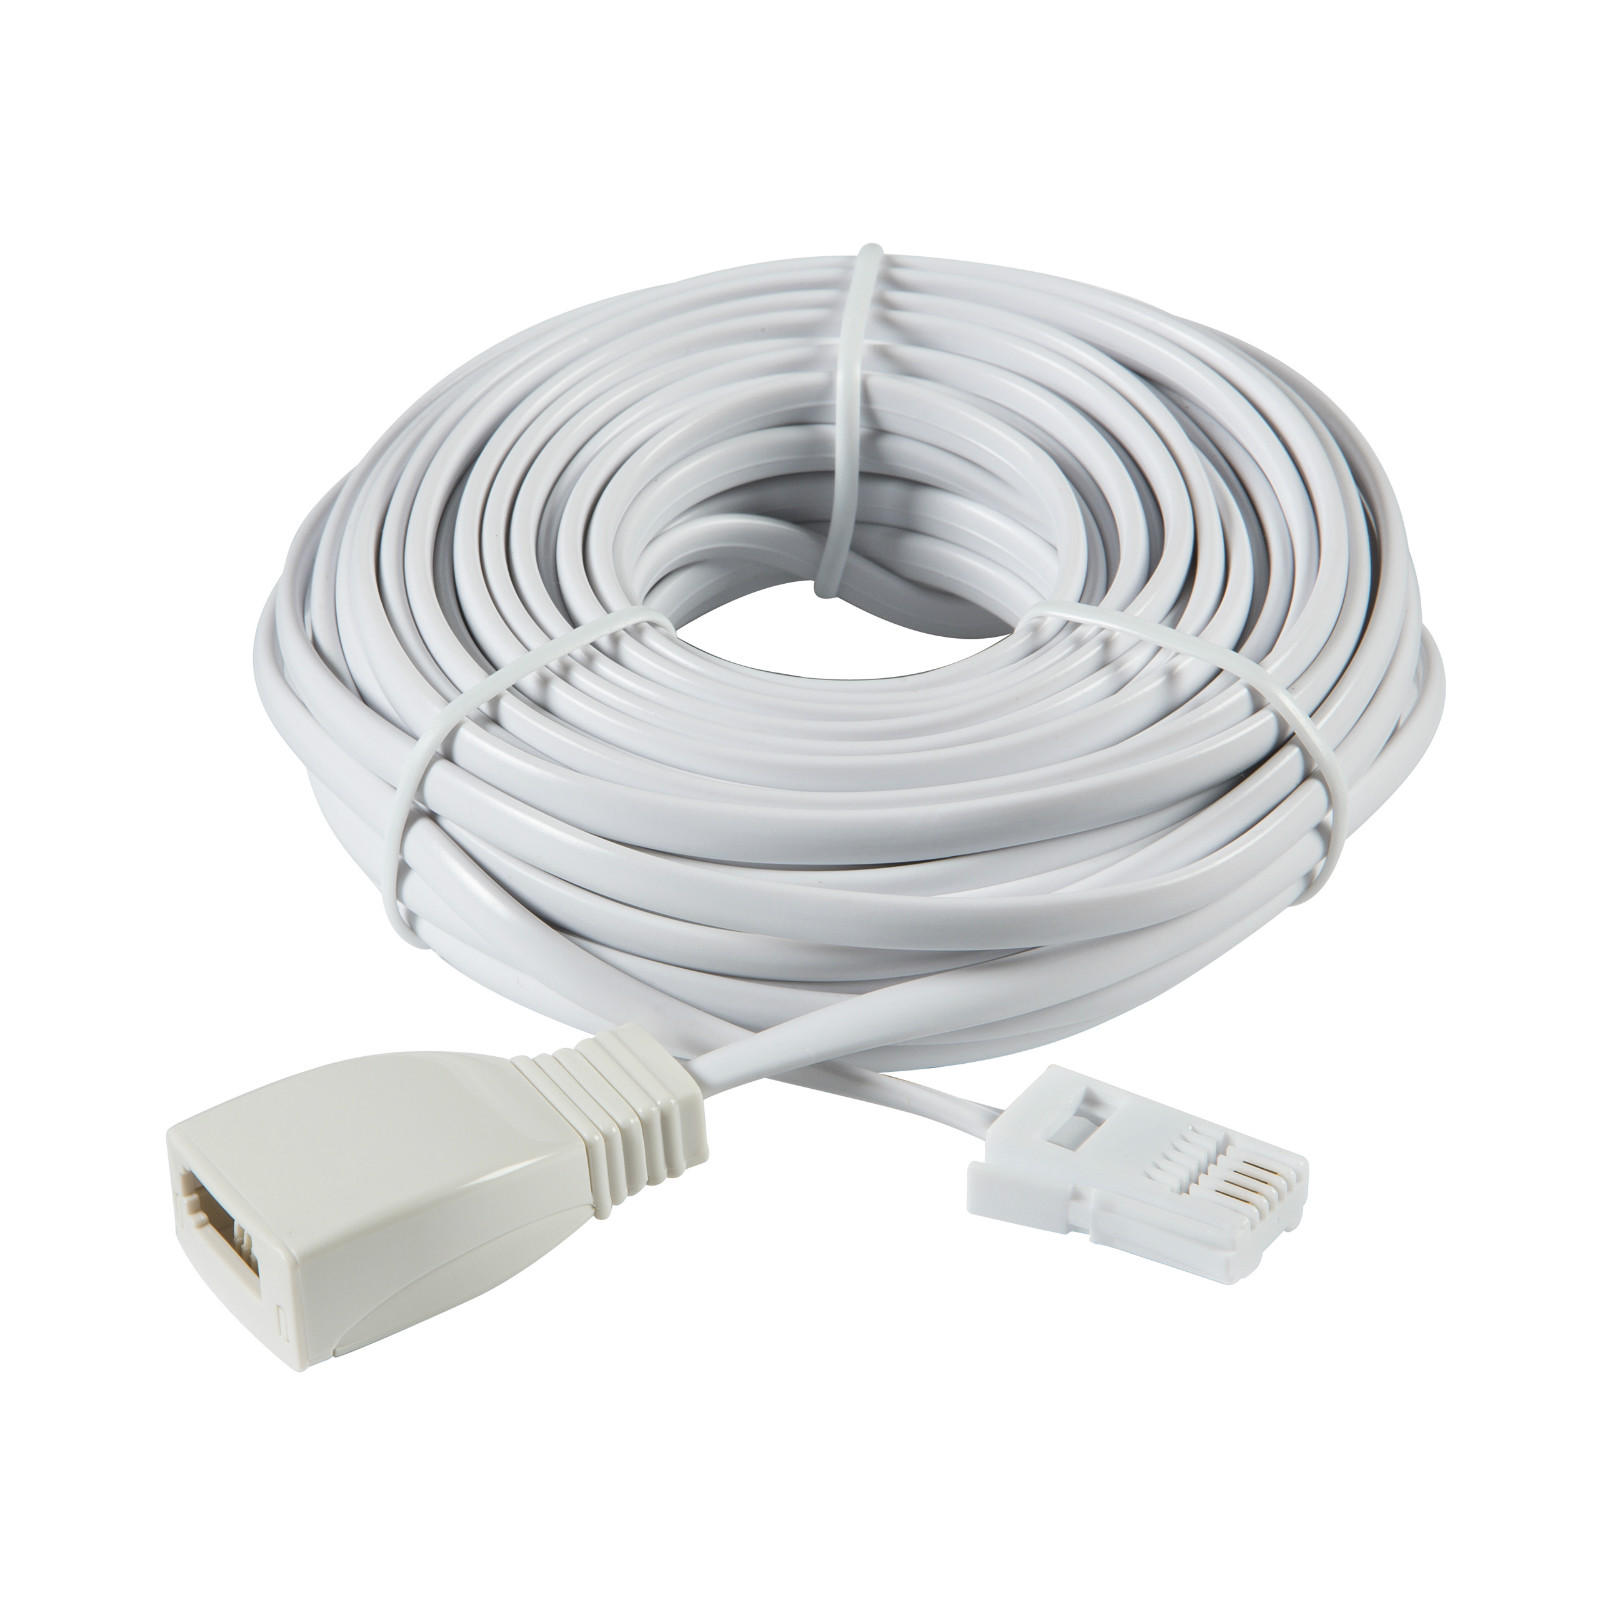 3m Telephone Extension Cable - LJ004 